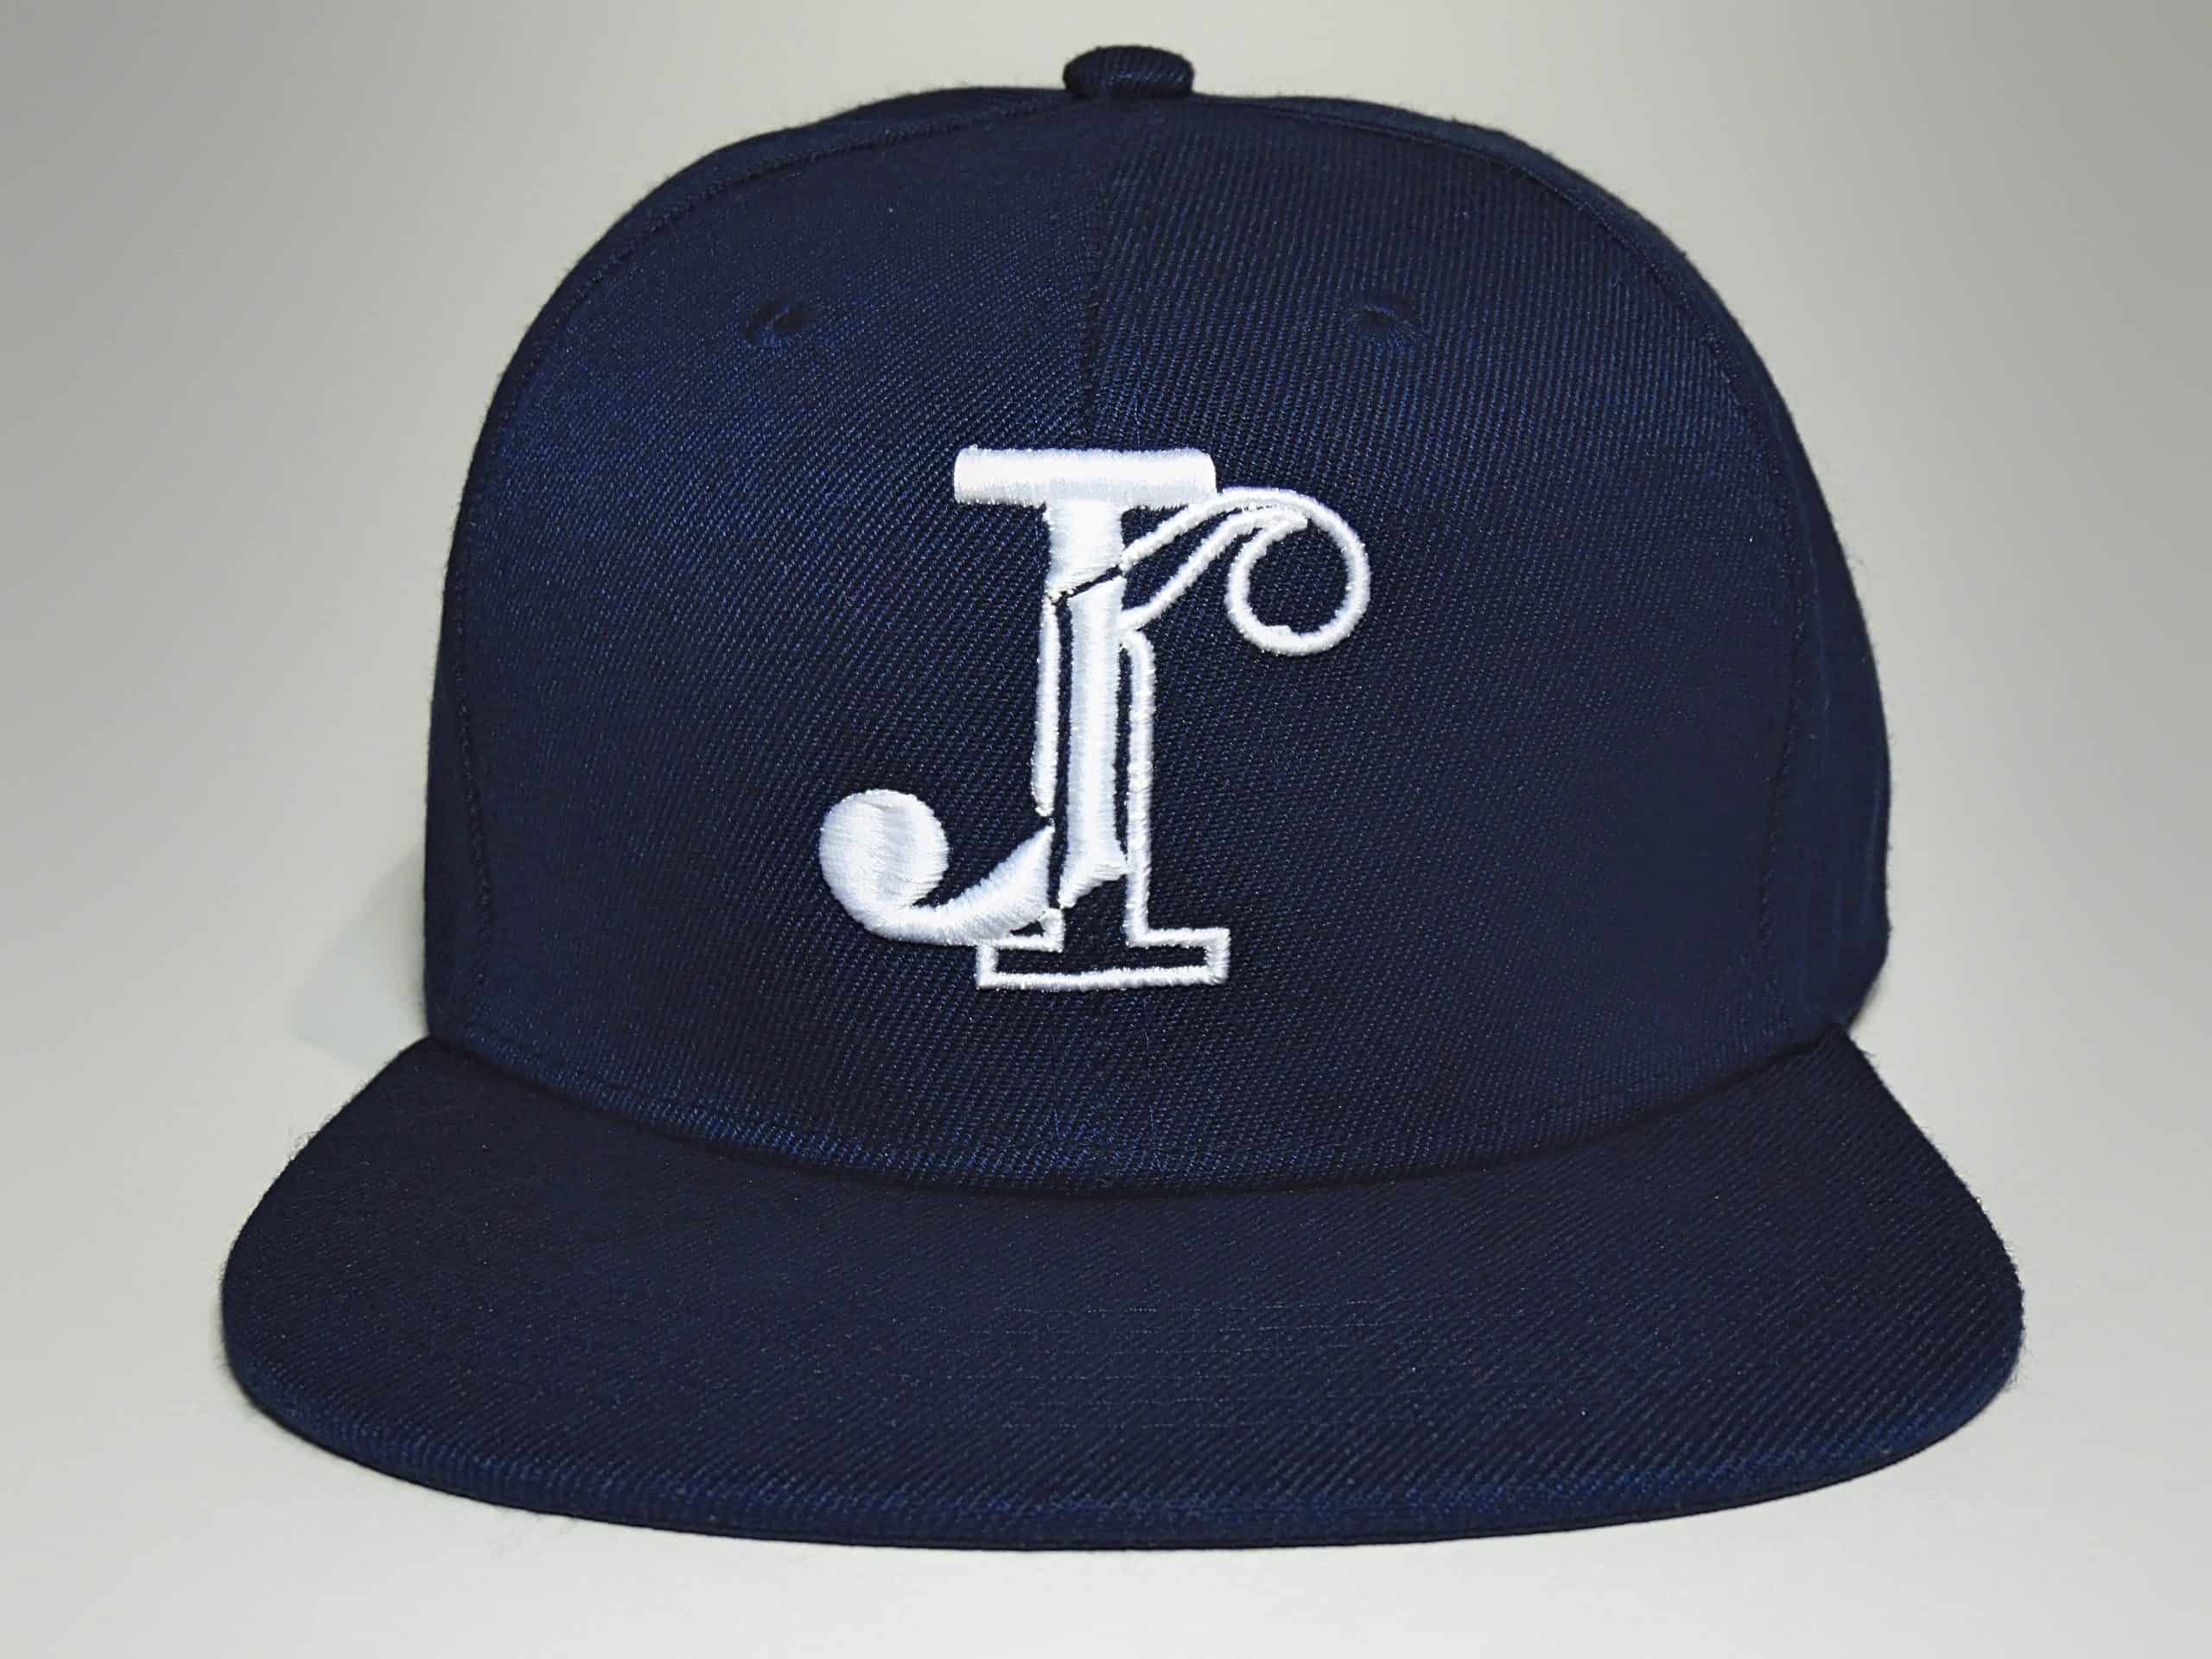 Jean-Jacques Navy Blue with Cap Snapback lettering, White Baseball